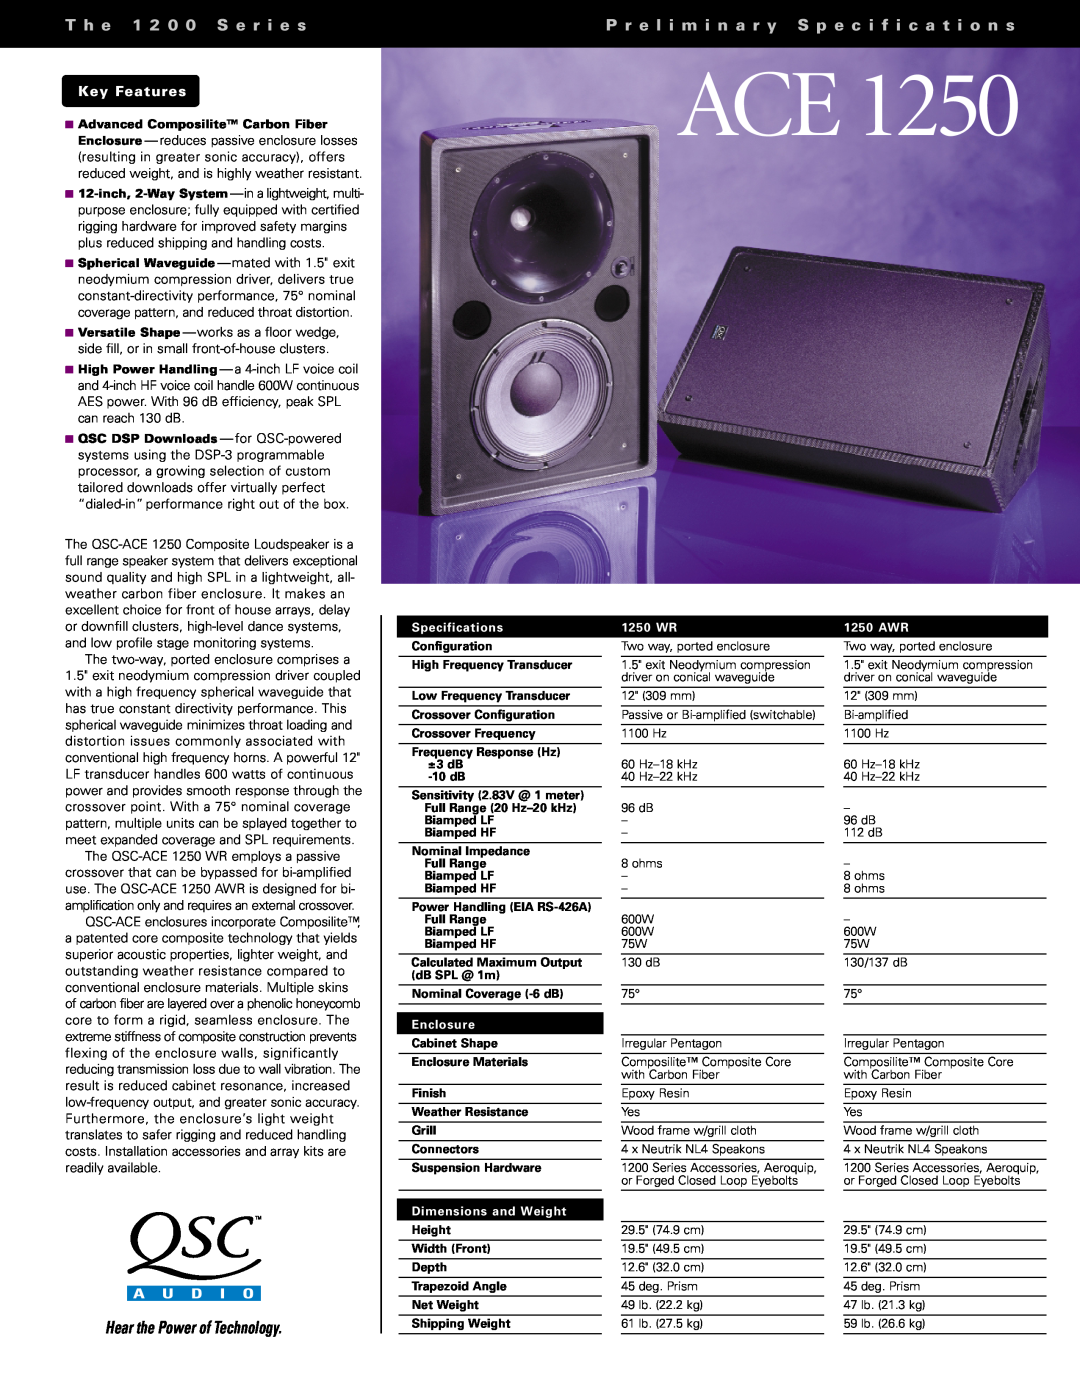 QSC Audio 1250 AWR, 1250 WR, ACE 1250 specifications Hear the Power of Technology, T h e 1 2 0 0 S e r i e s, Key Features 